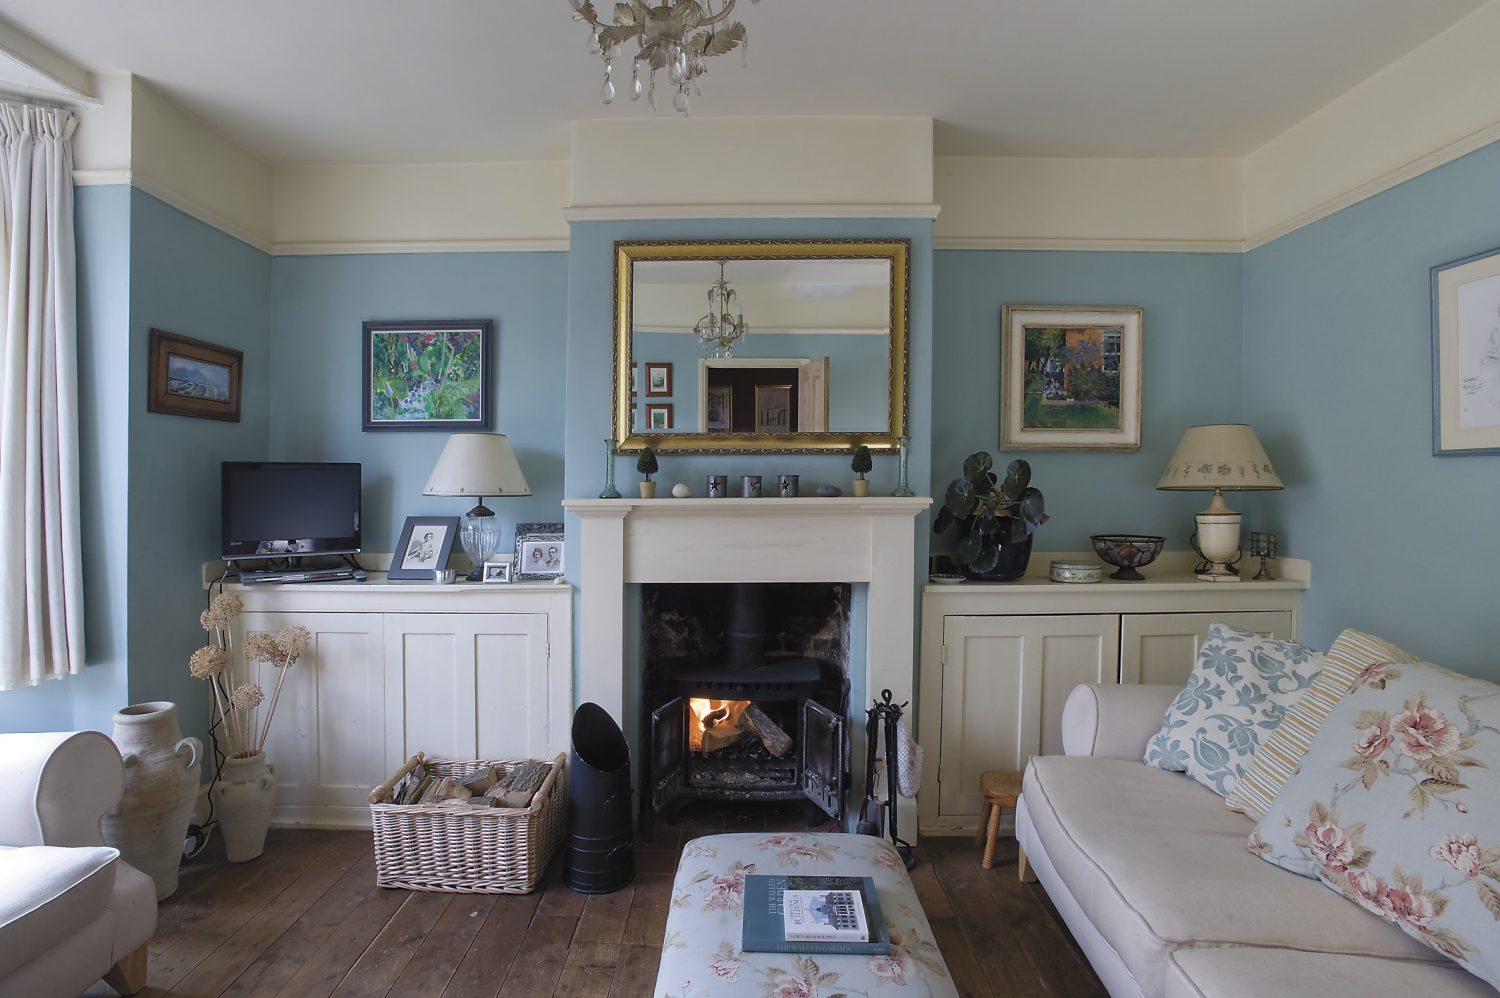 the duck-egg blue drawing room, at the front of the house, was added on in the Georgian period. The painting on the right-hand side of the fireplace is by Frittenden artist Anne-Catherine Phillips